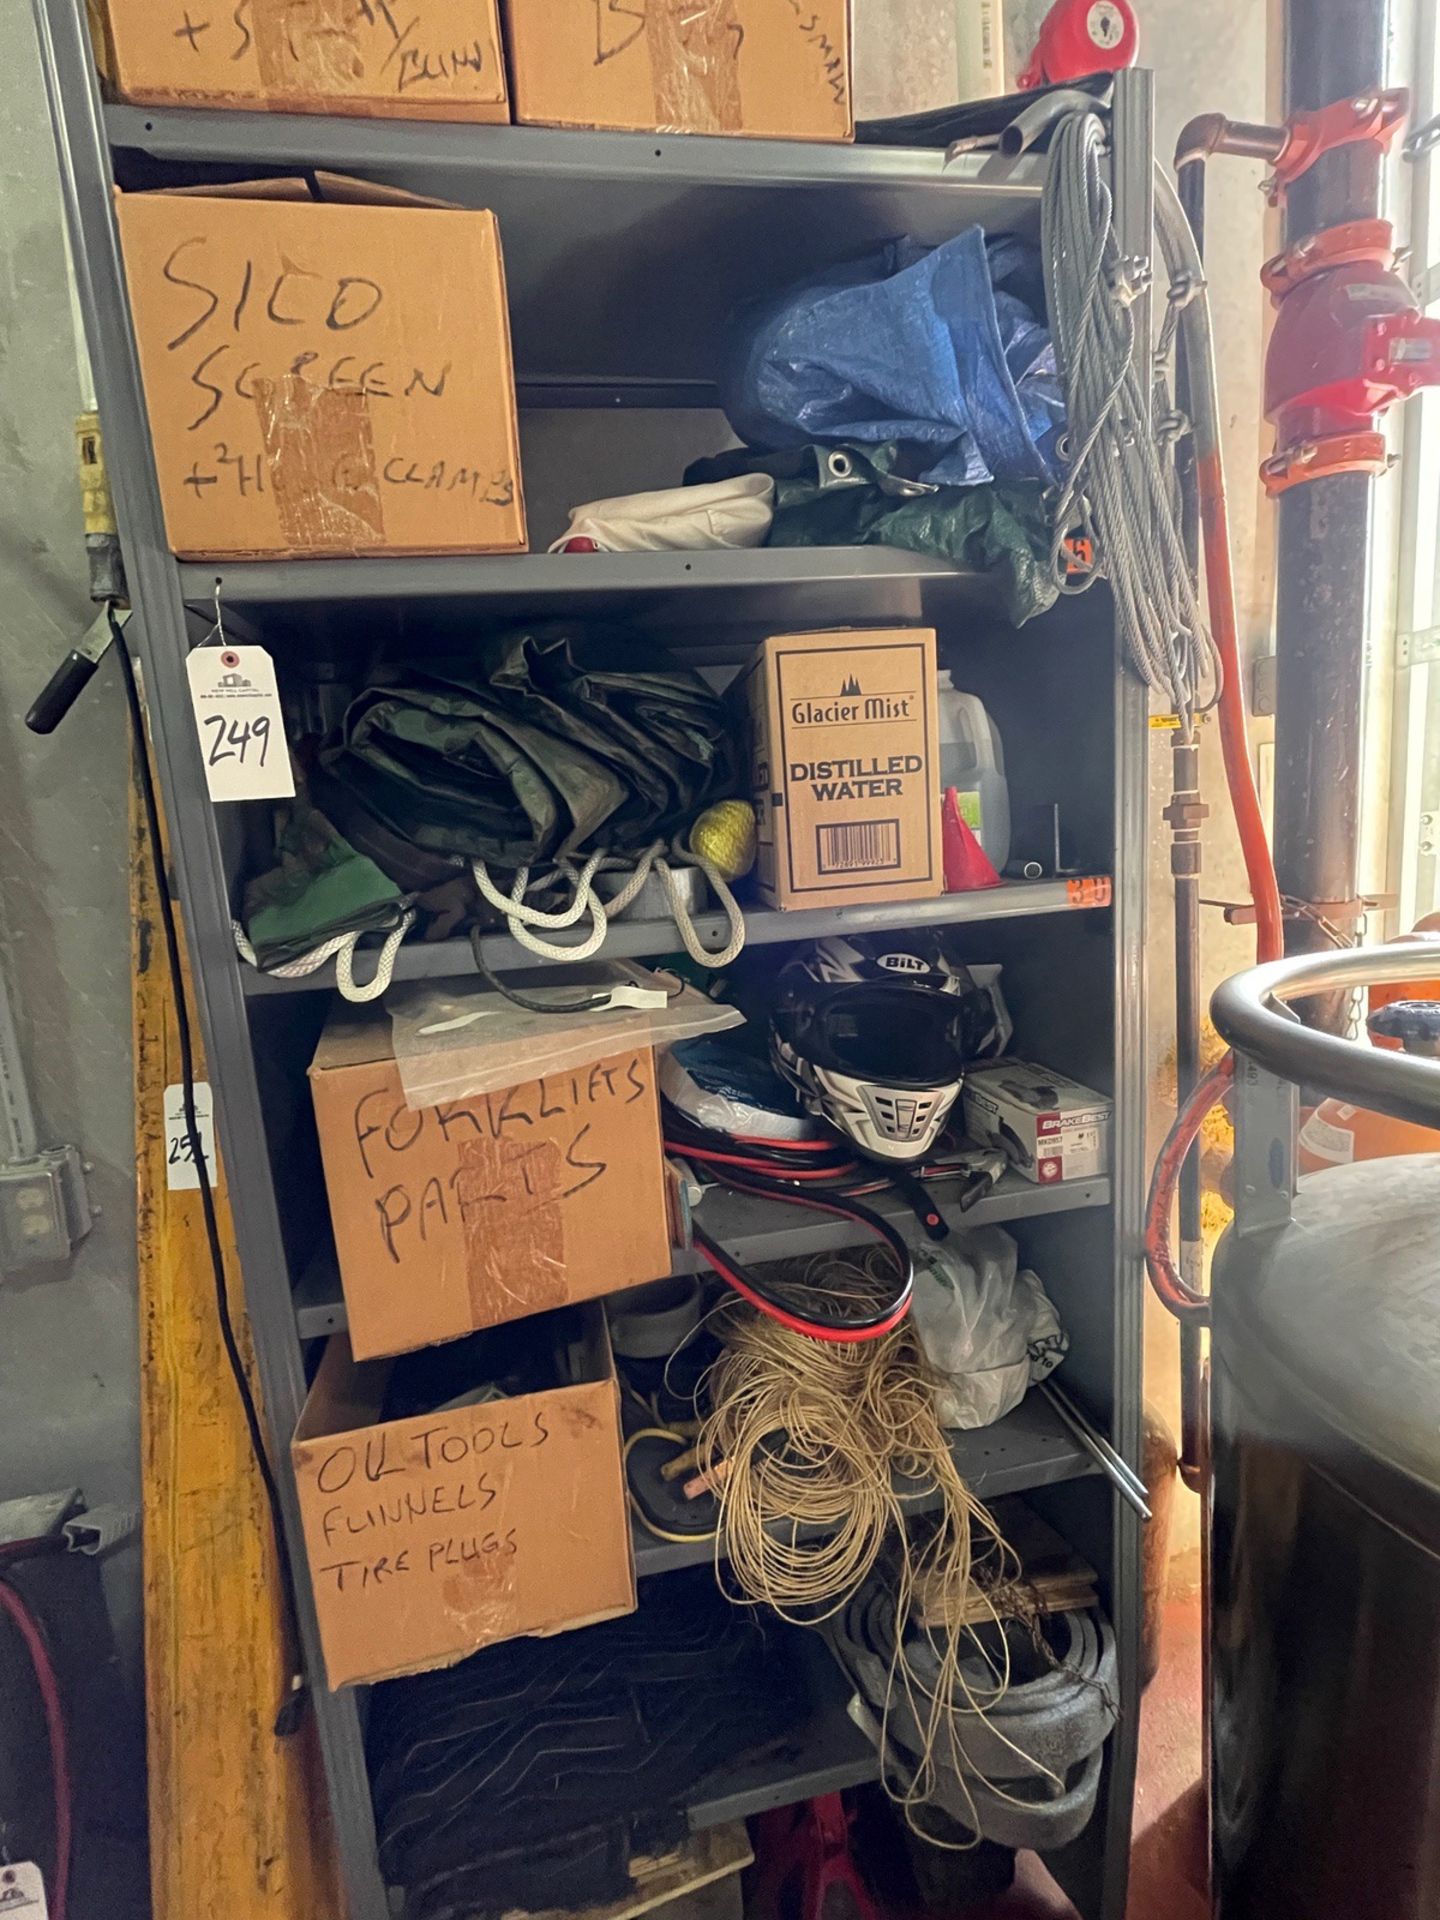 Section of Loading Dock Parts (includes items on shelf and shelving unit), shelving | Rig Fee $200